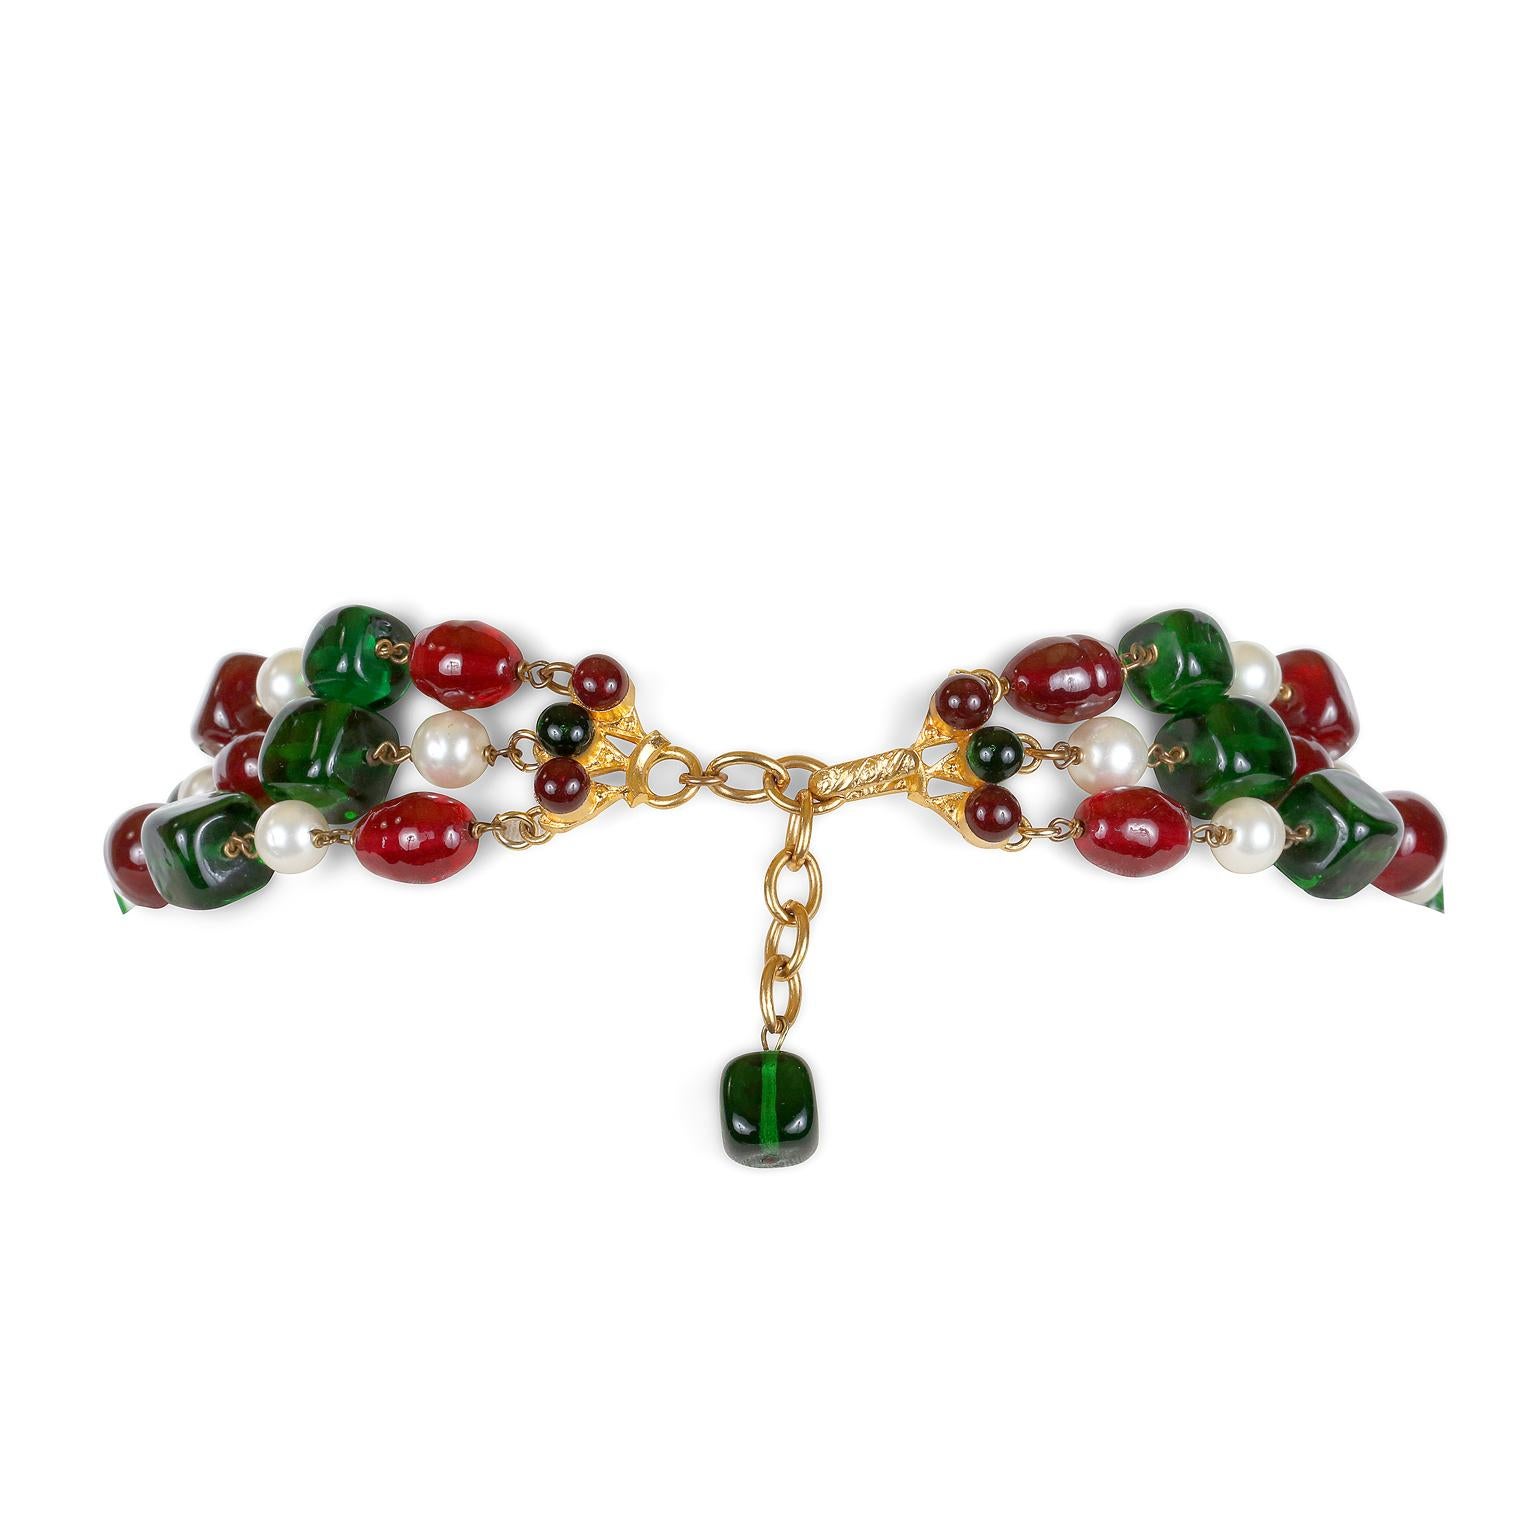 This authentic Chanel Red and Green Gripoix Triple Strand Necklace is in excellent condition from the Fall 1993 collection.  Festively designed in vibrant red and green Gripoix glass beads and interspersed with faux pearls.  Two beaded tassels